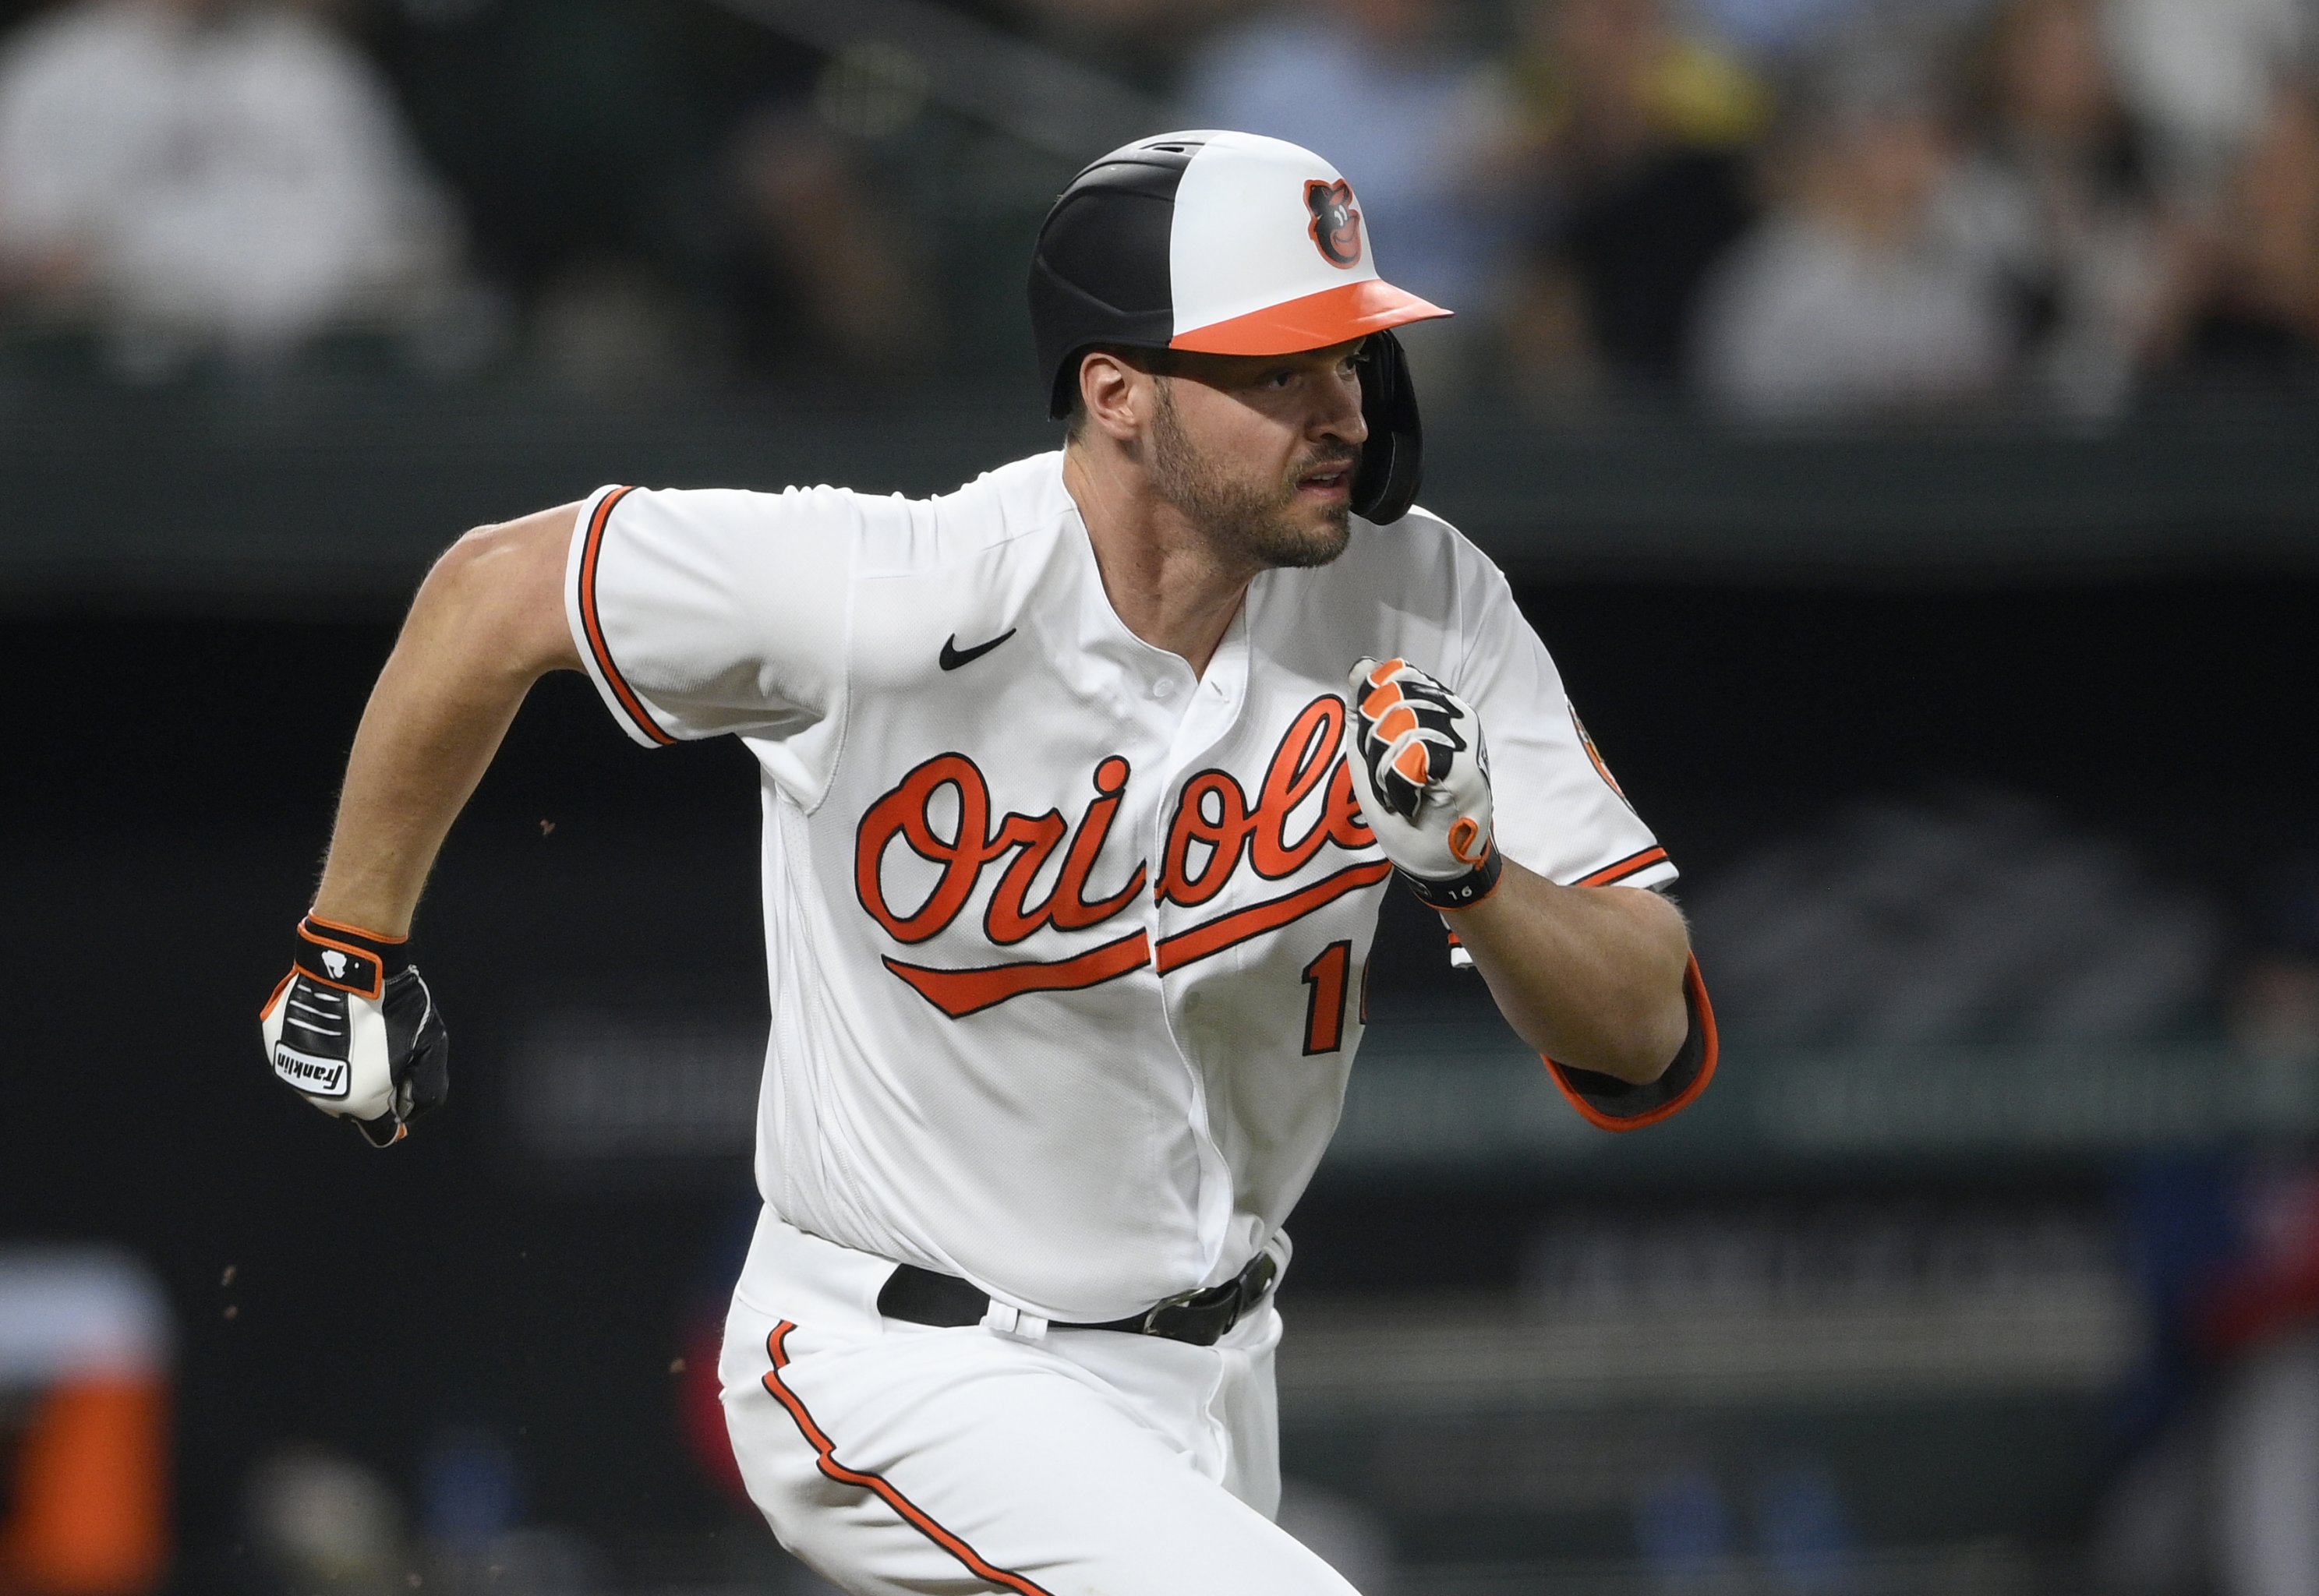 Rapid Questions with Trey Mancini